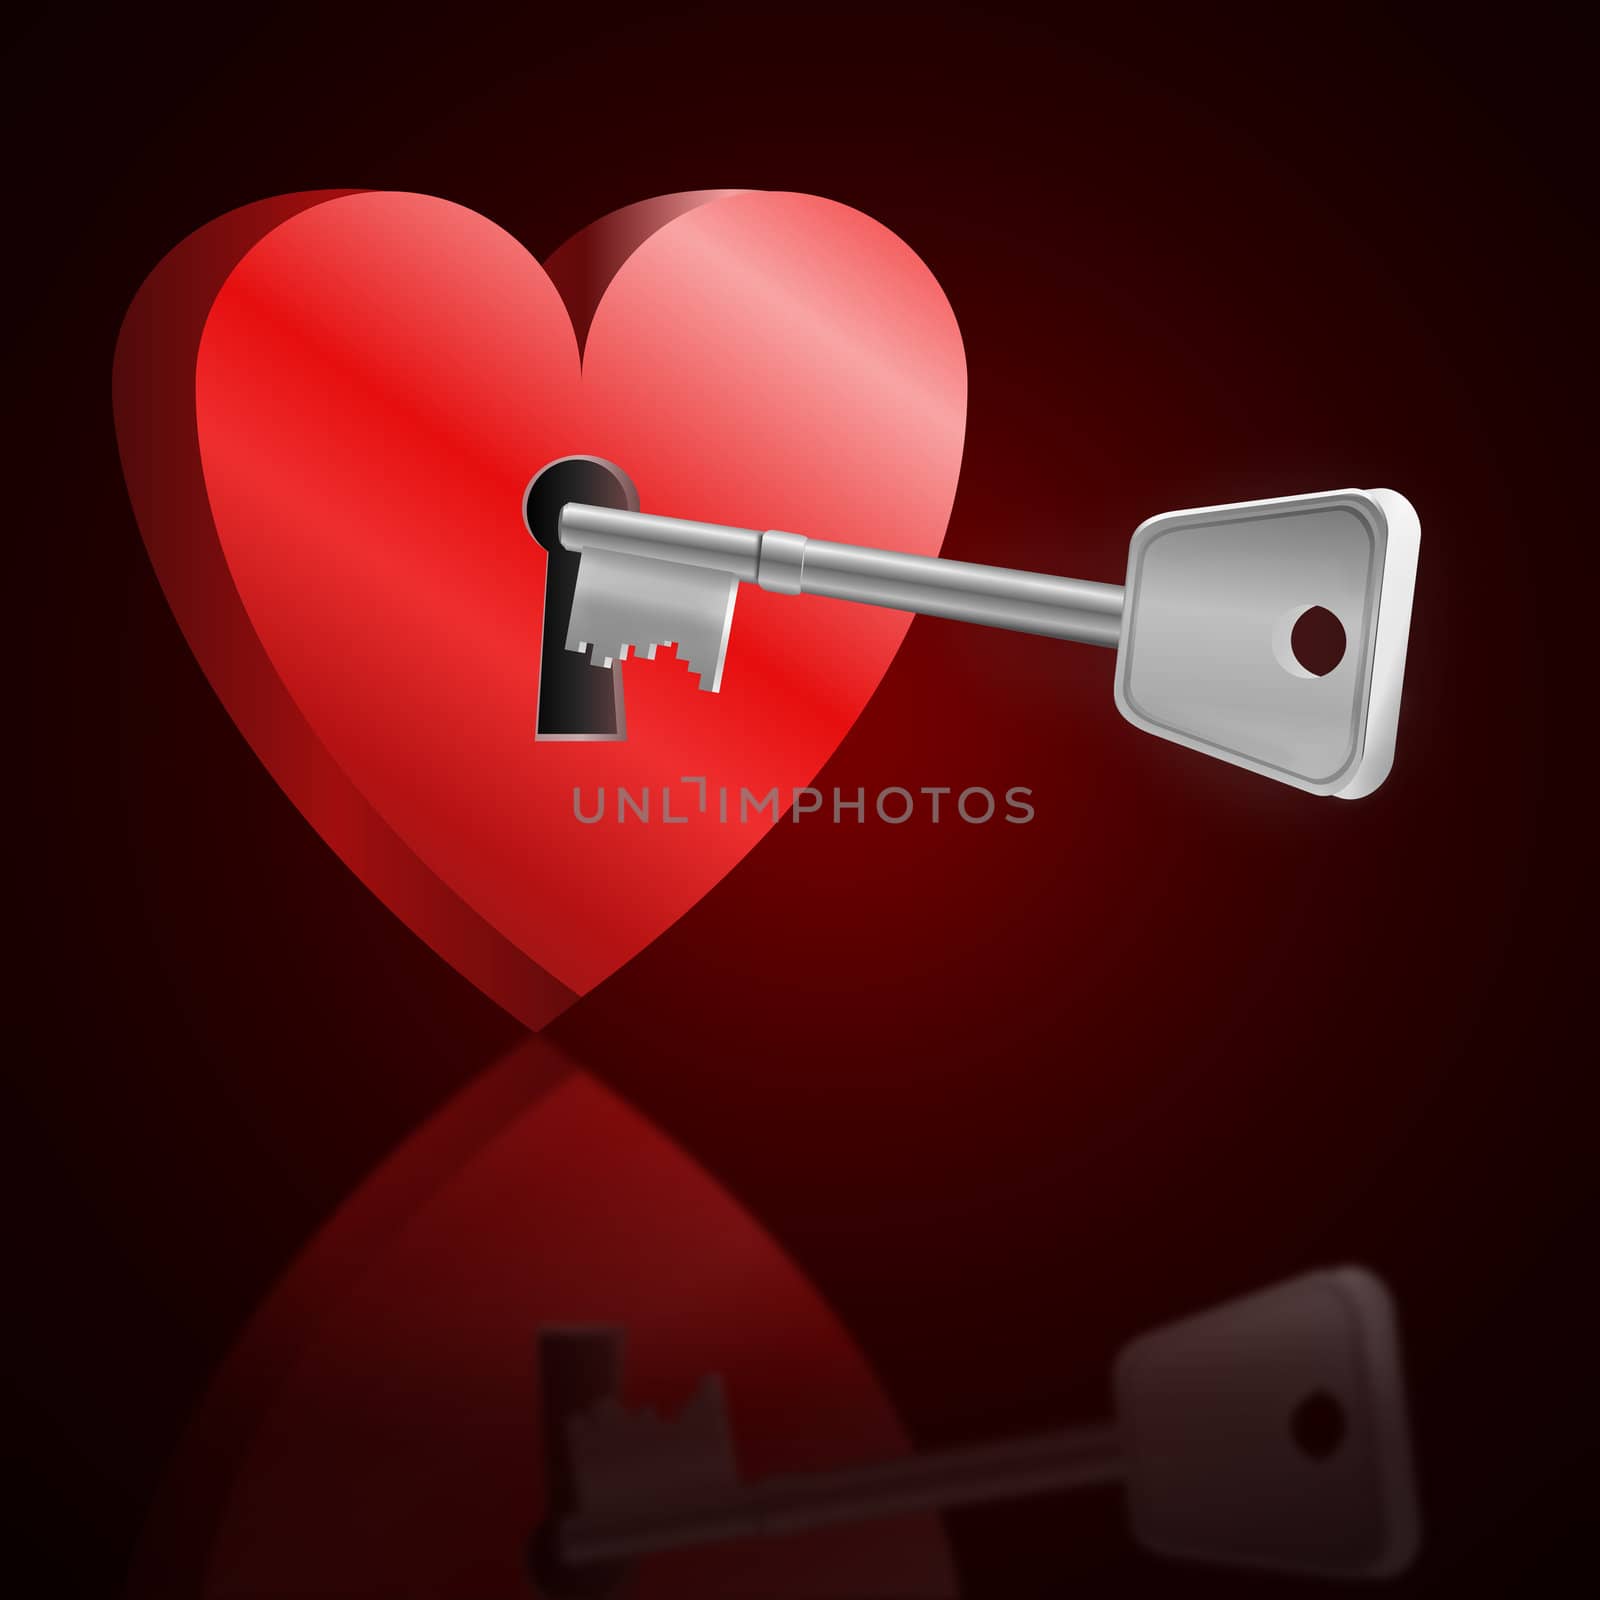 Illustration depicting a love heart with keyhole and a single key reflecting into foreground. Dark red background.